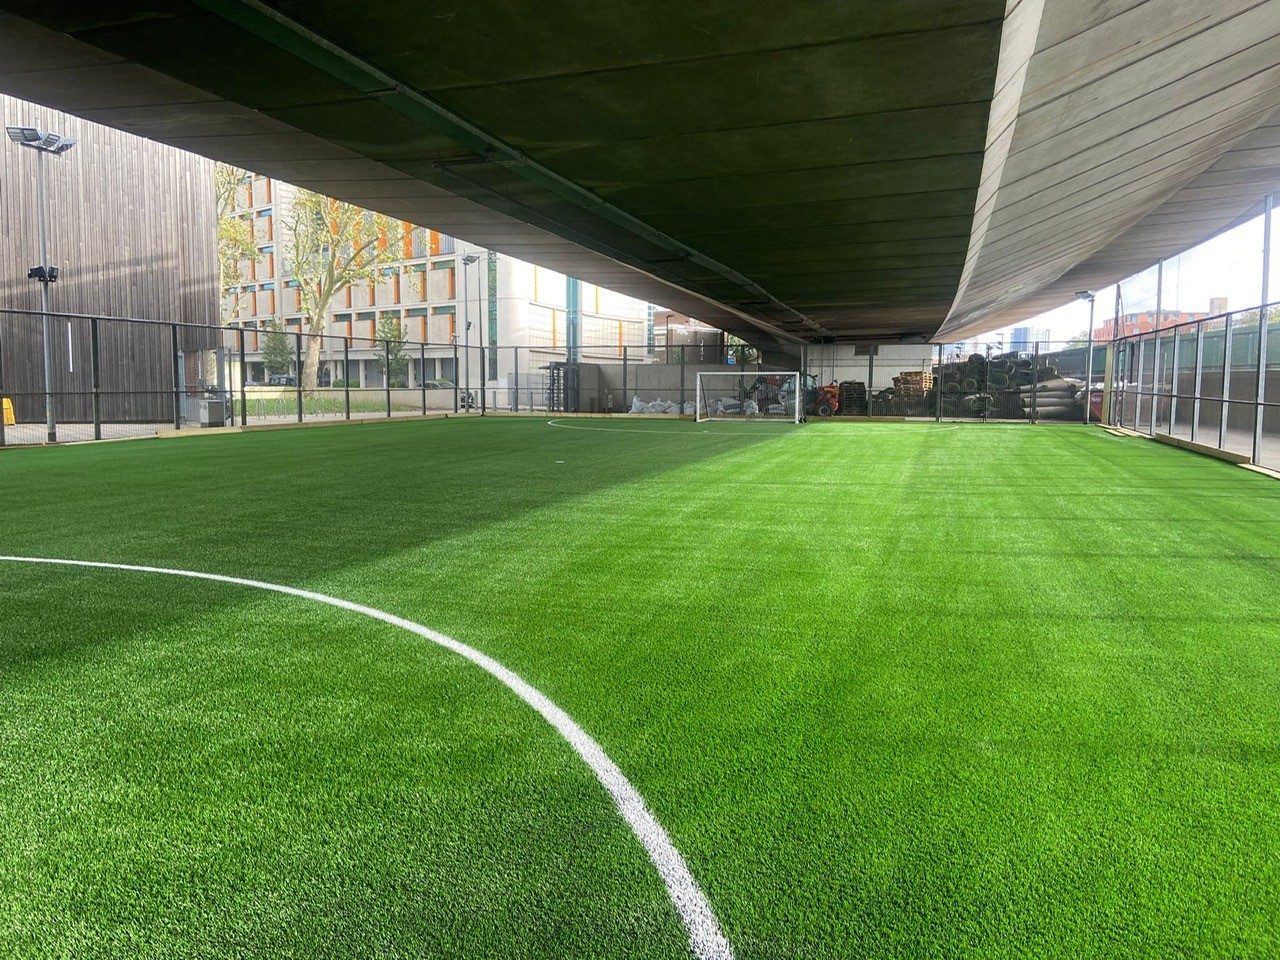 Resurfacing these football pitch constructions directly underneath London’s Westway required careful traffic management and health and safety protocols.